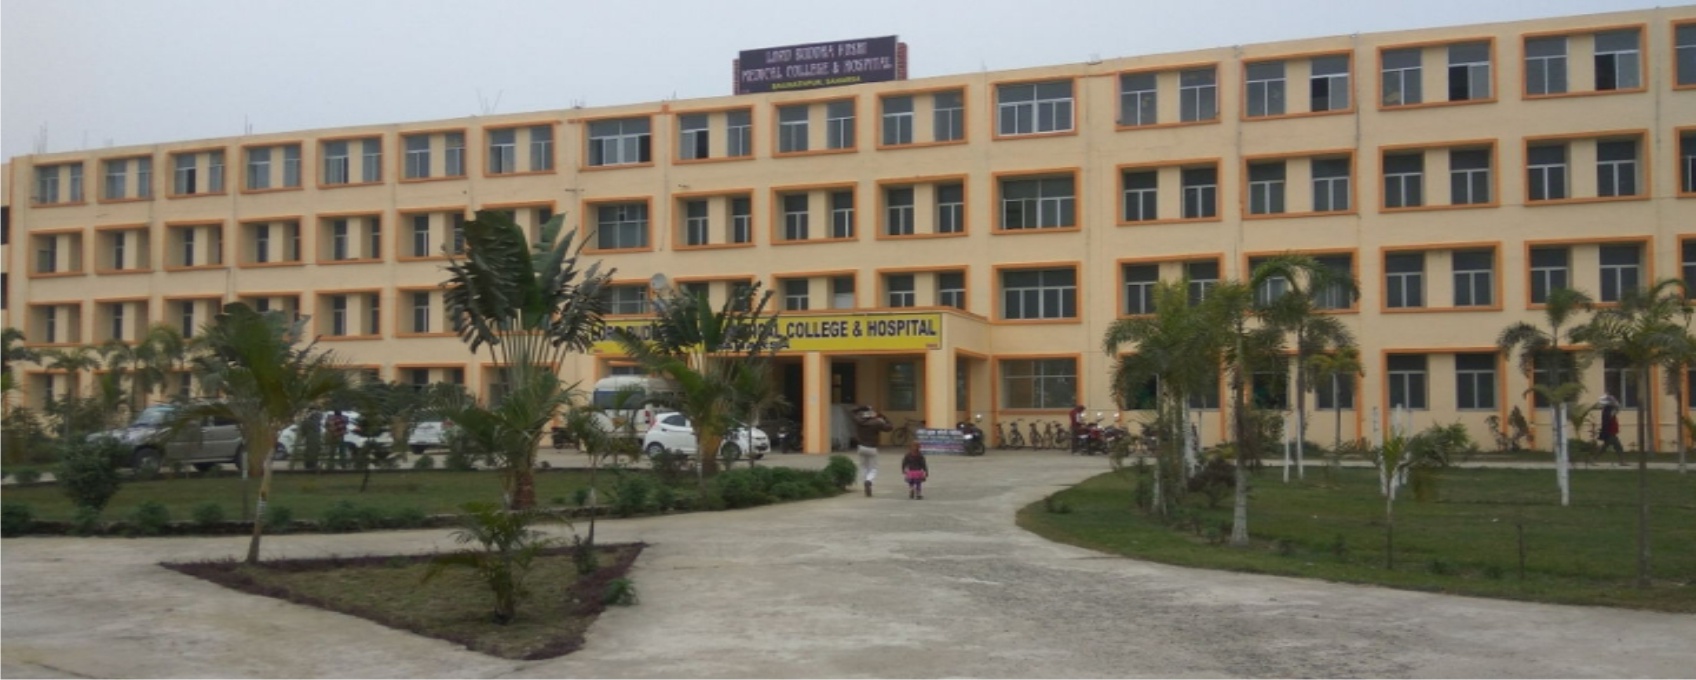 Government Medical College, Bettiah